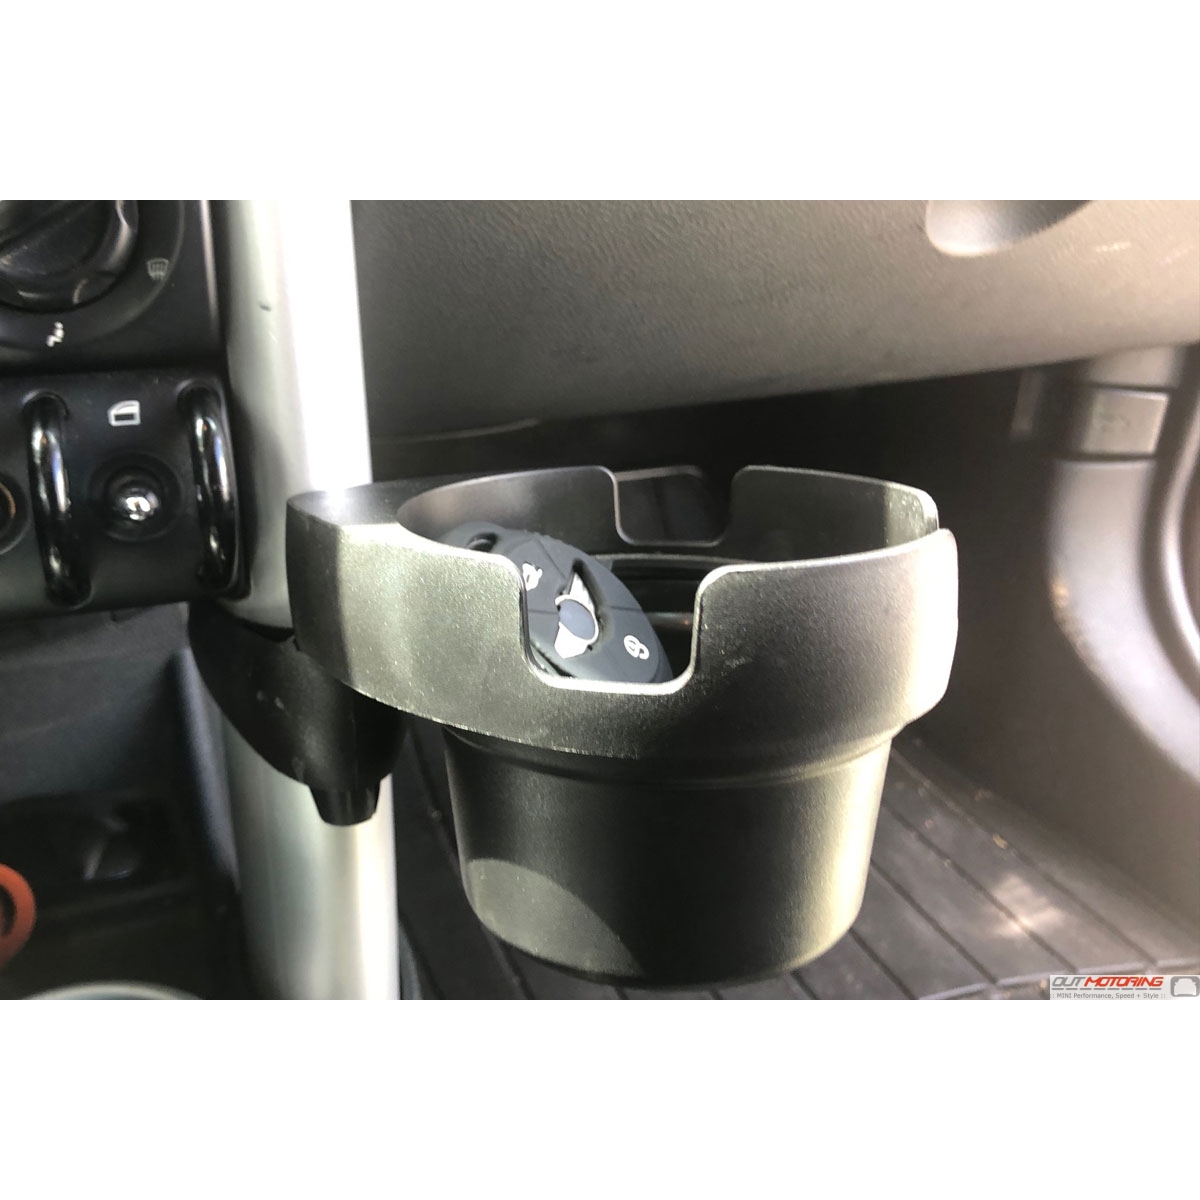 MINI Cooper R50 R52 R53 Front Cup Holder Cupholder - MINI Cooper  Accessories + MINI Cooper Parts